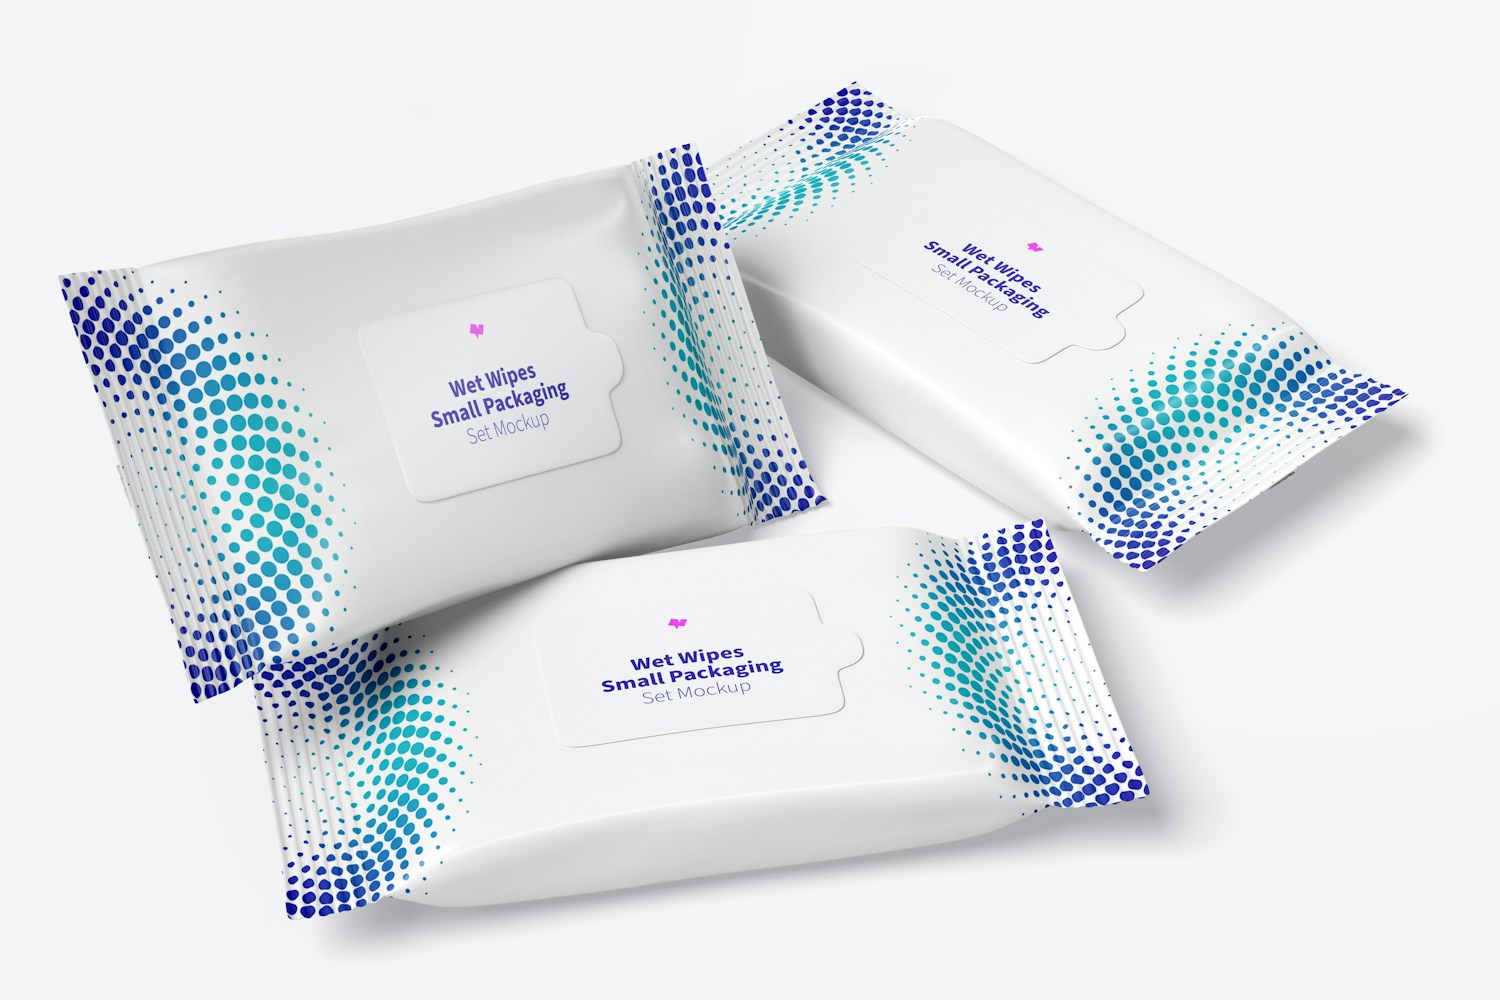 Wet Wipes Small Packaging Set Mockup